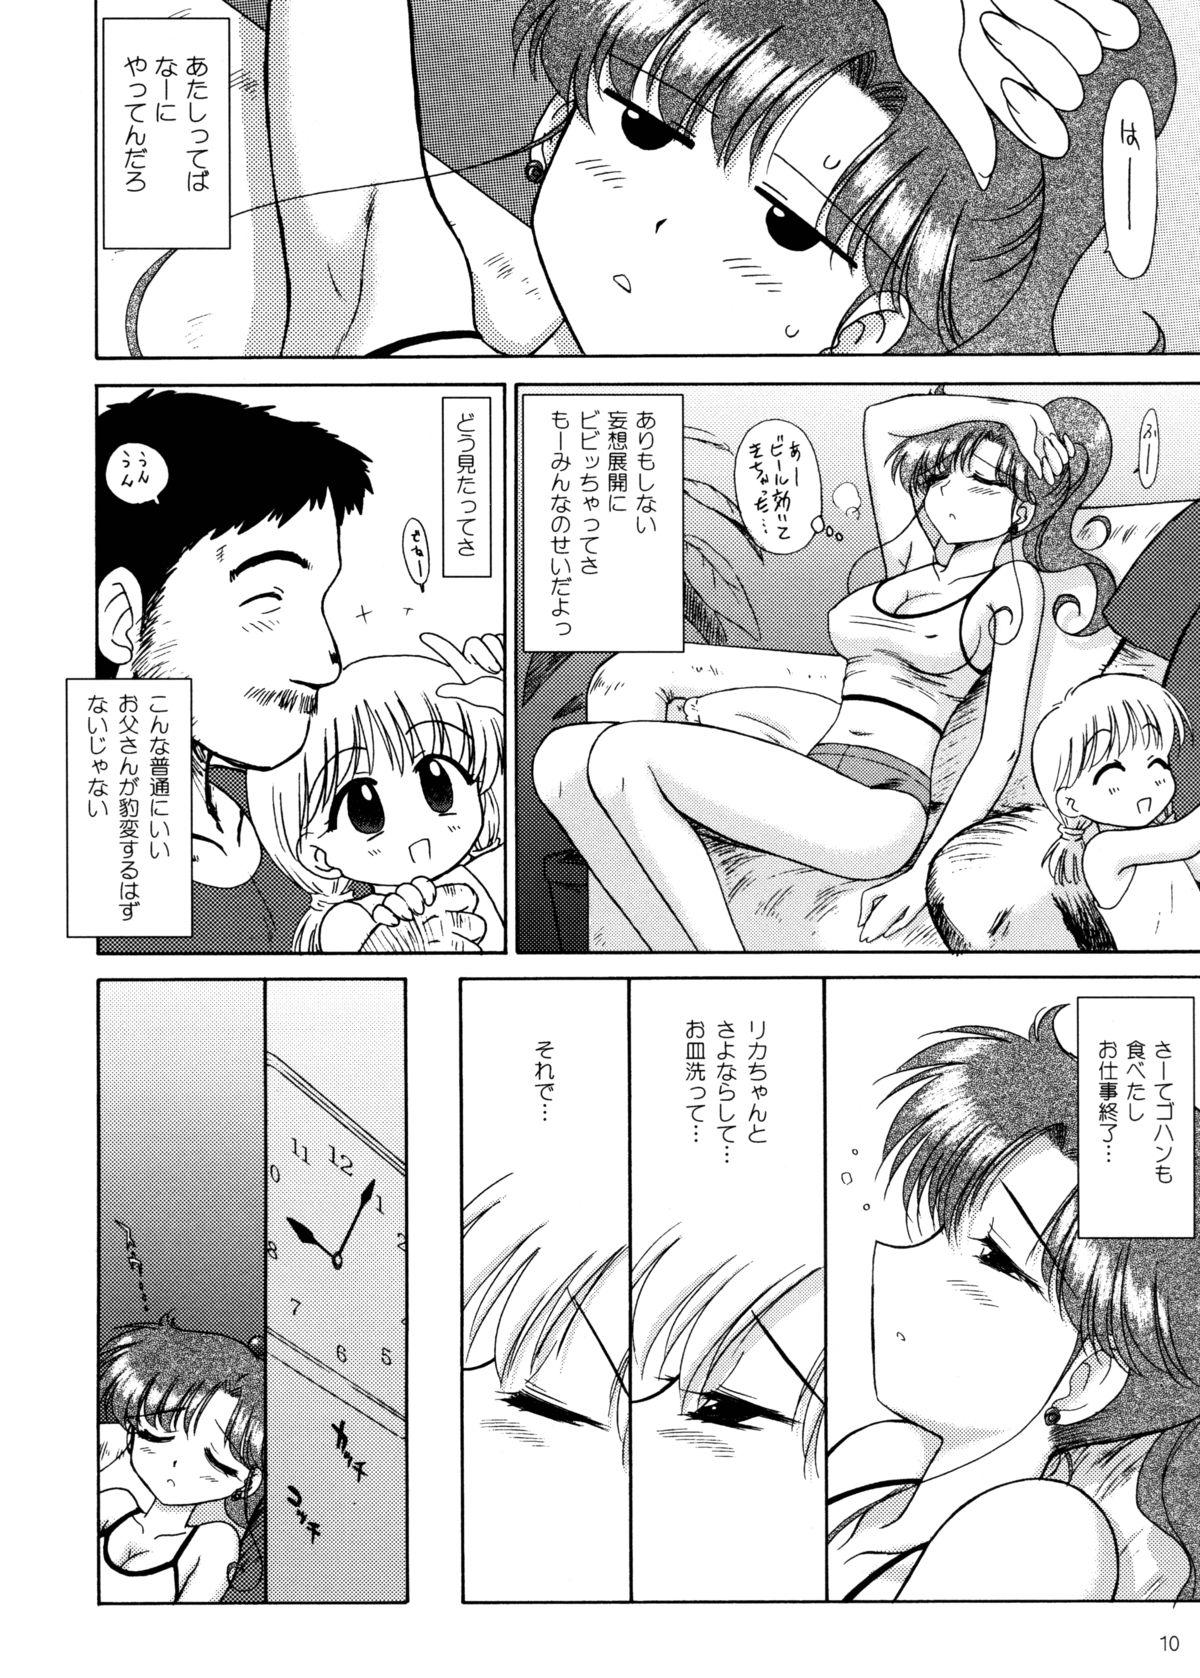 Milf Fuck In a Silent Way - Sailor moon Tranny - Page 9